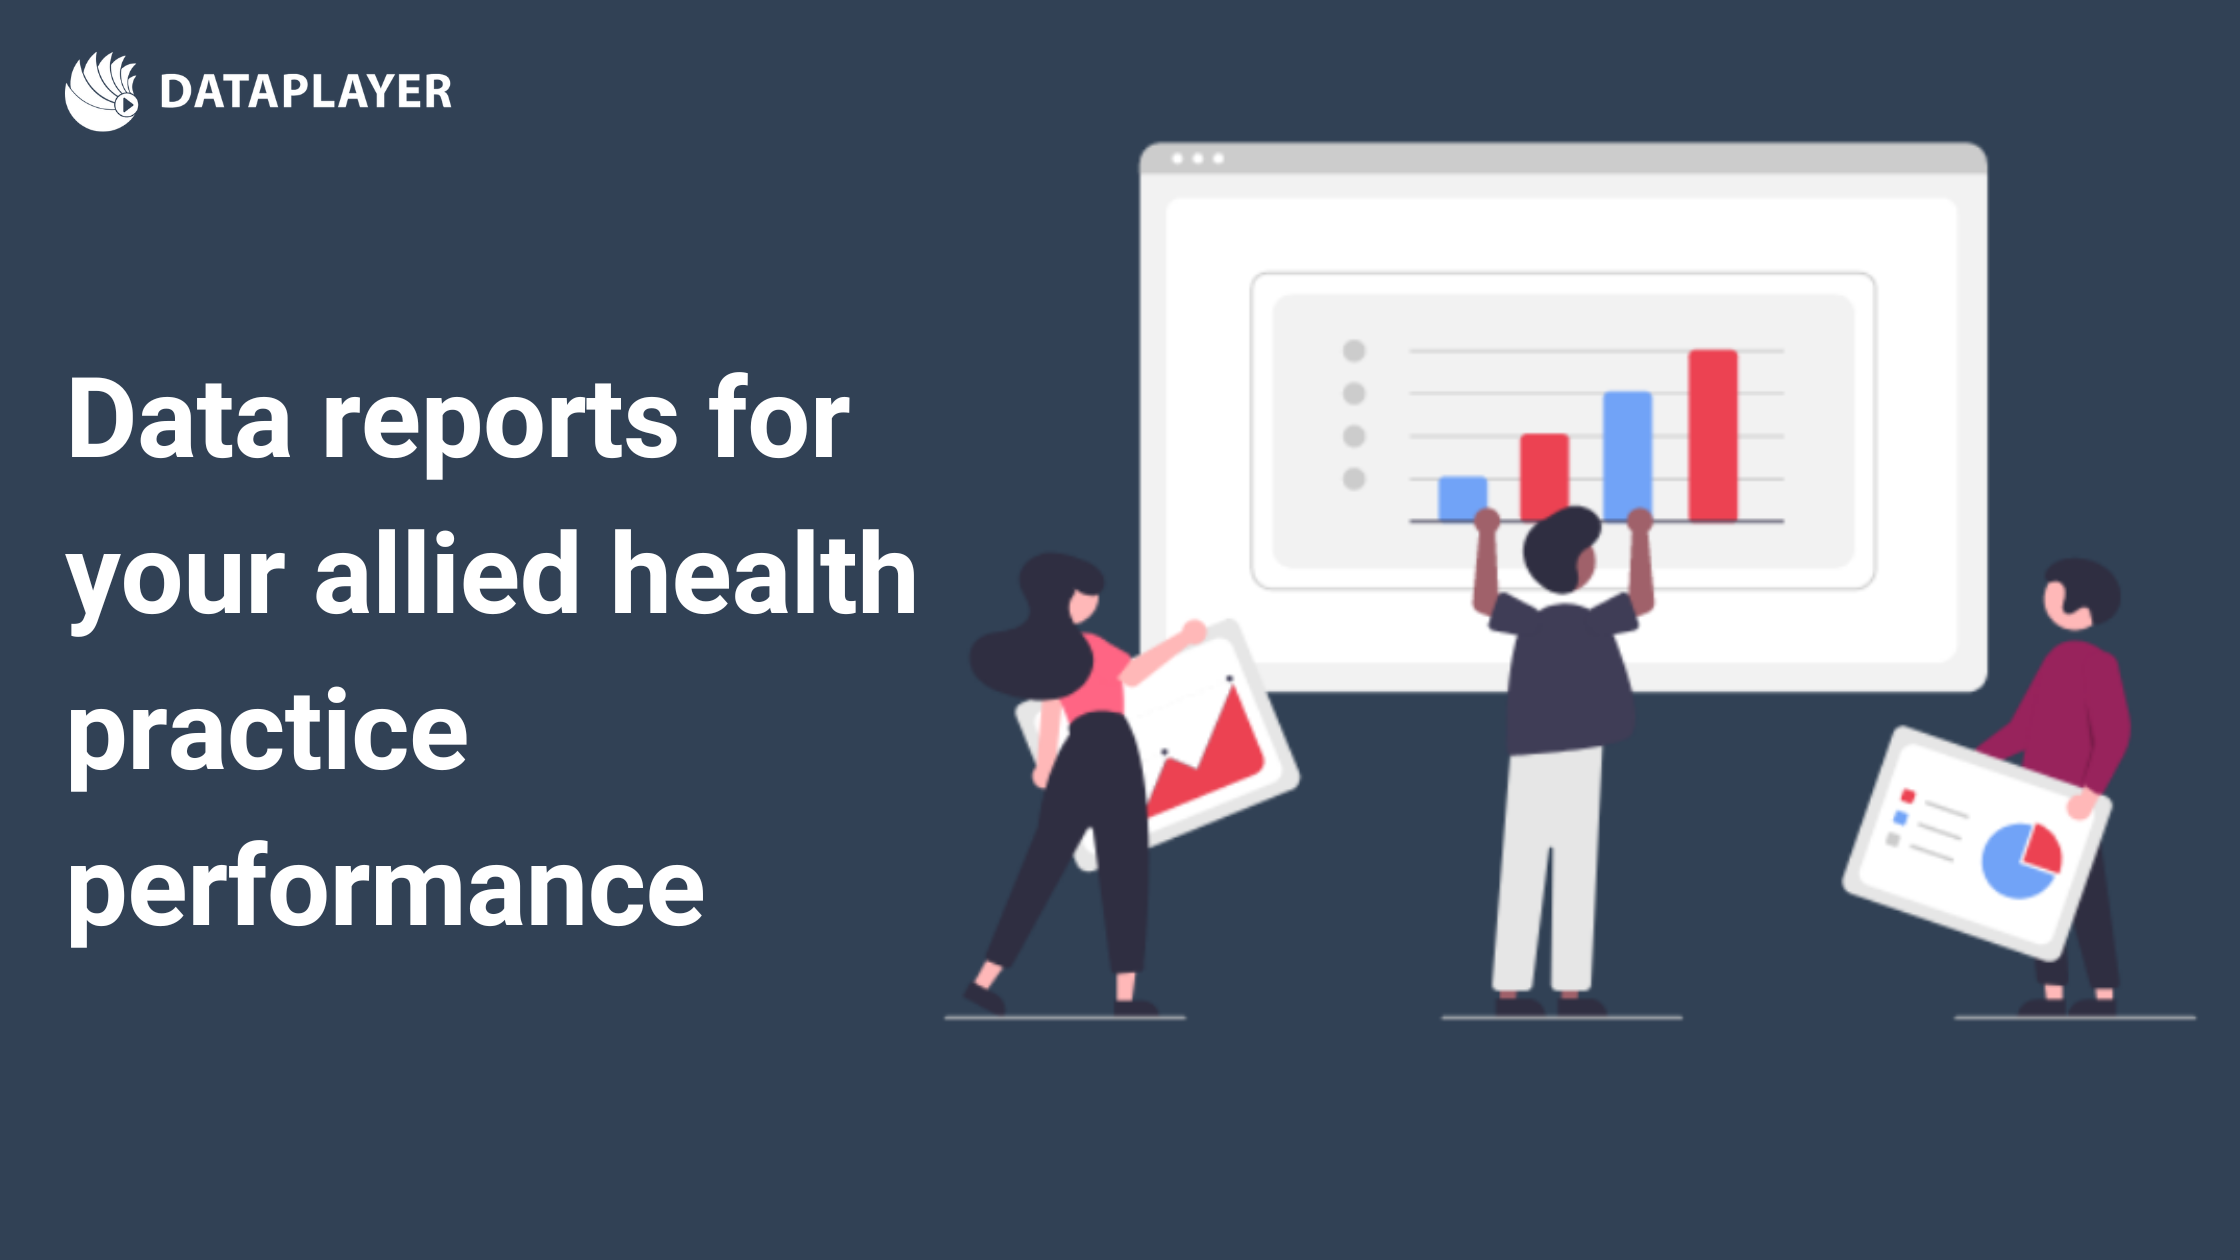 Data reports for your allied health practice performance